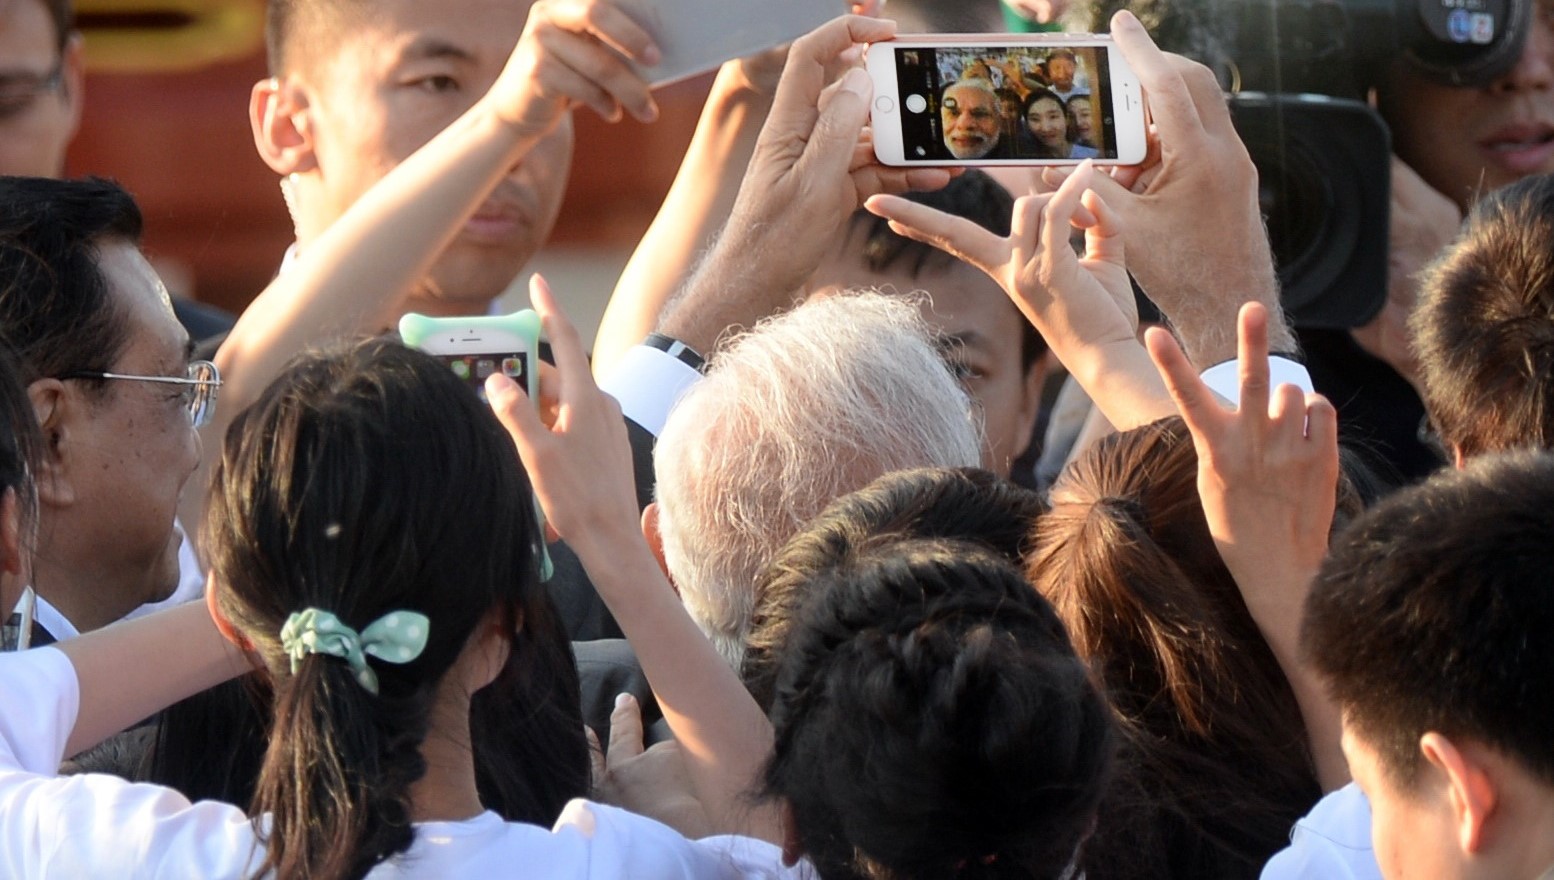 Indian Prime Minister Narendra Modi takes a selfie in Beijing, 2015 (Photo: Getty images/Pool)